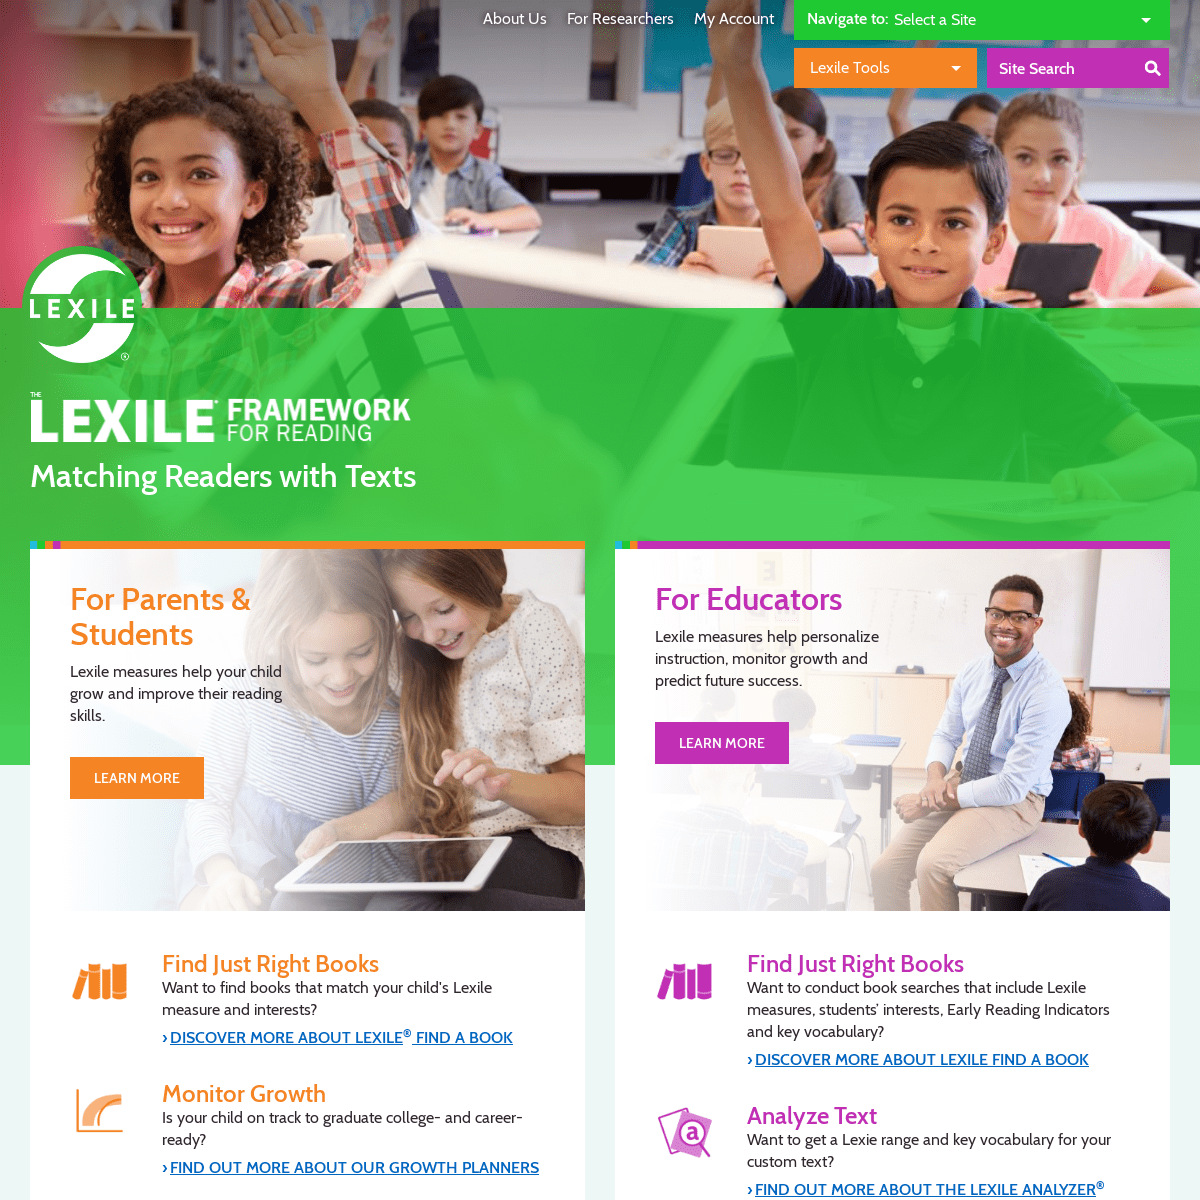 A complete backup of lexile.com